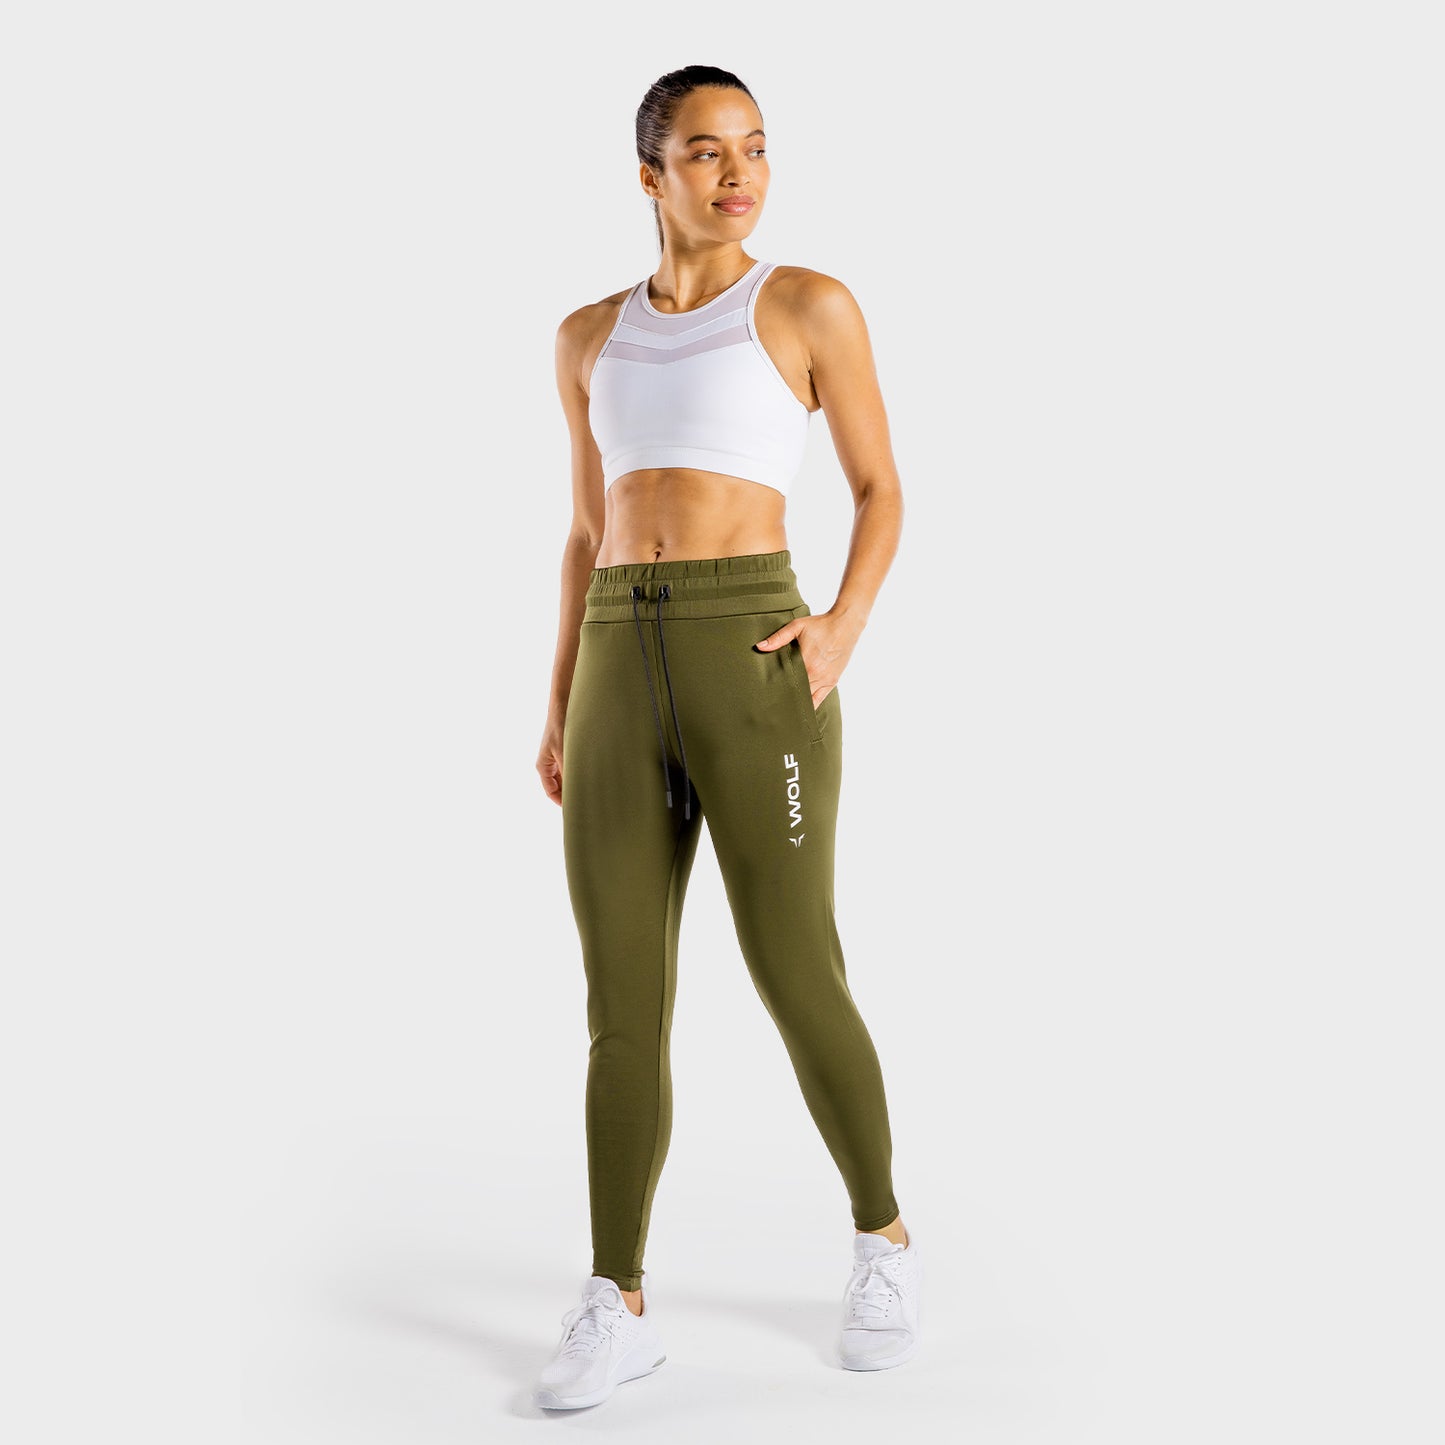 squatwolf-gym-pants-for-women-primal-joggers-pearl-khaki-workout-clothes